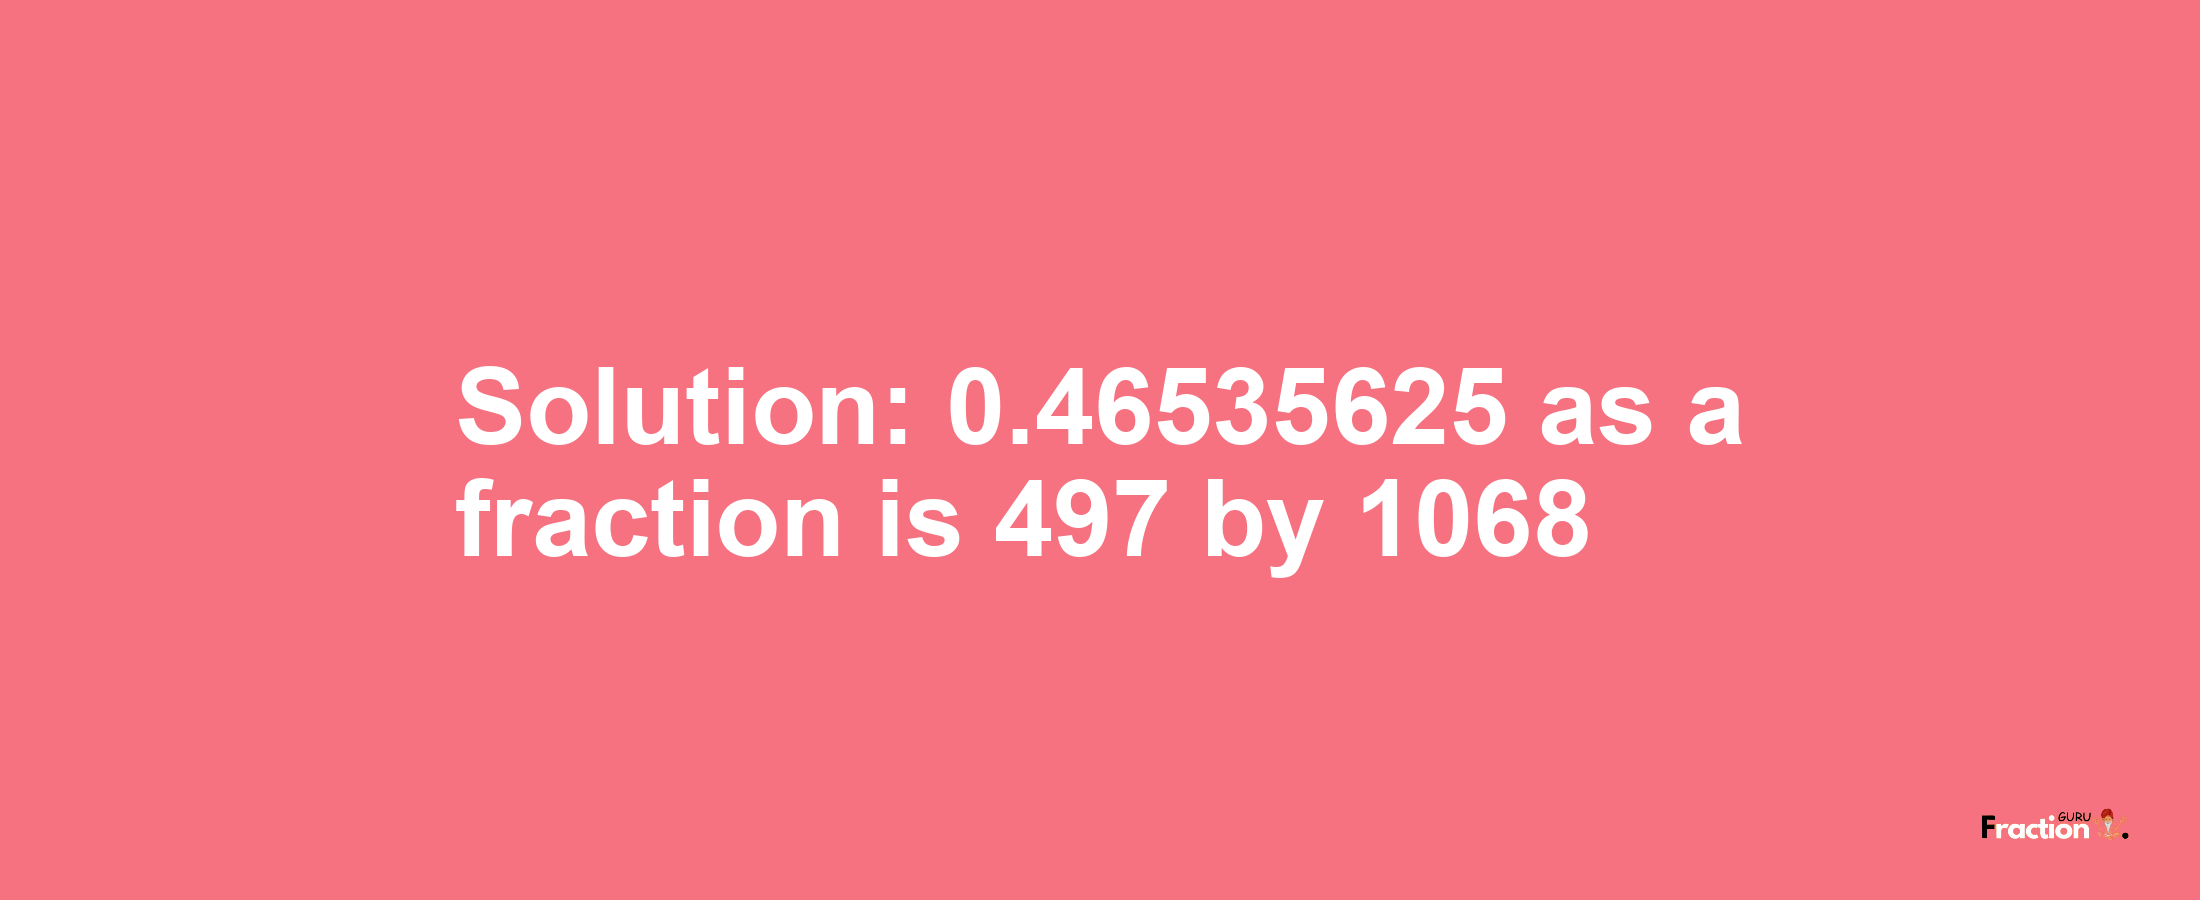 Solution:0.46535625 as a fraction is 497/1068